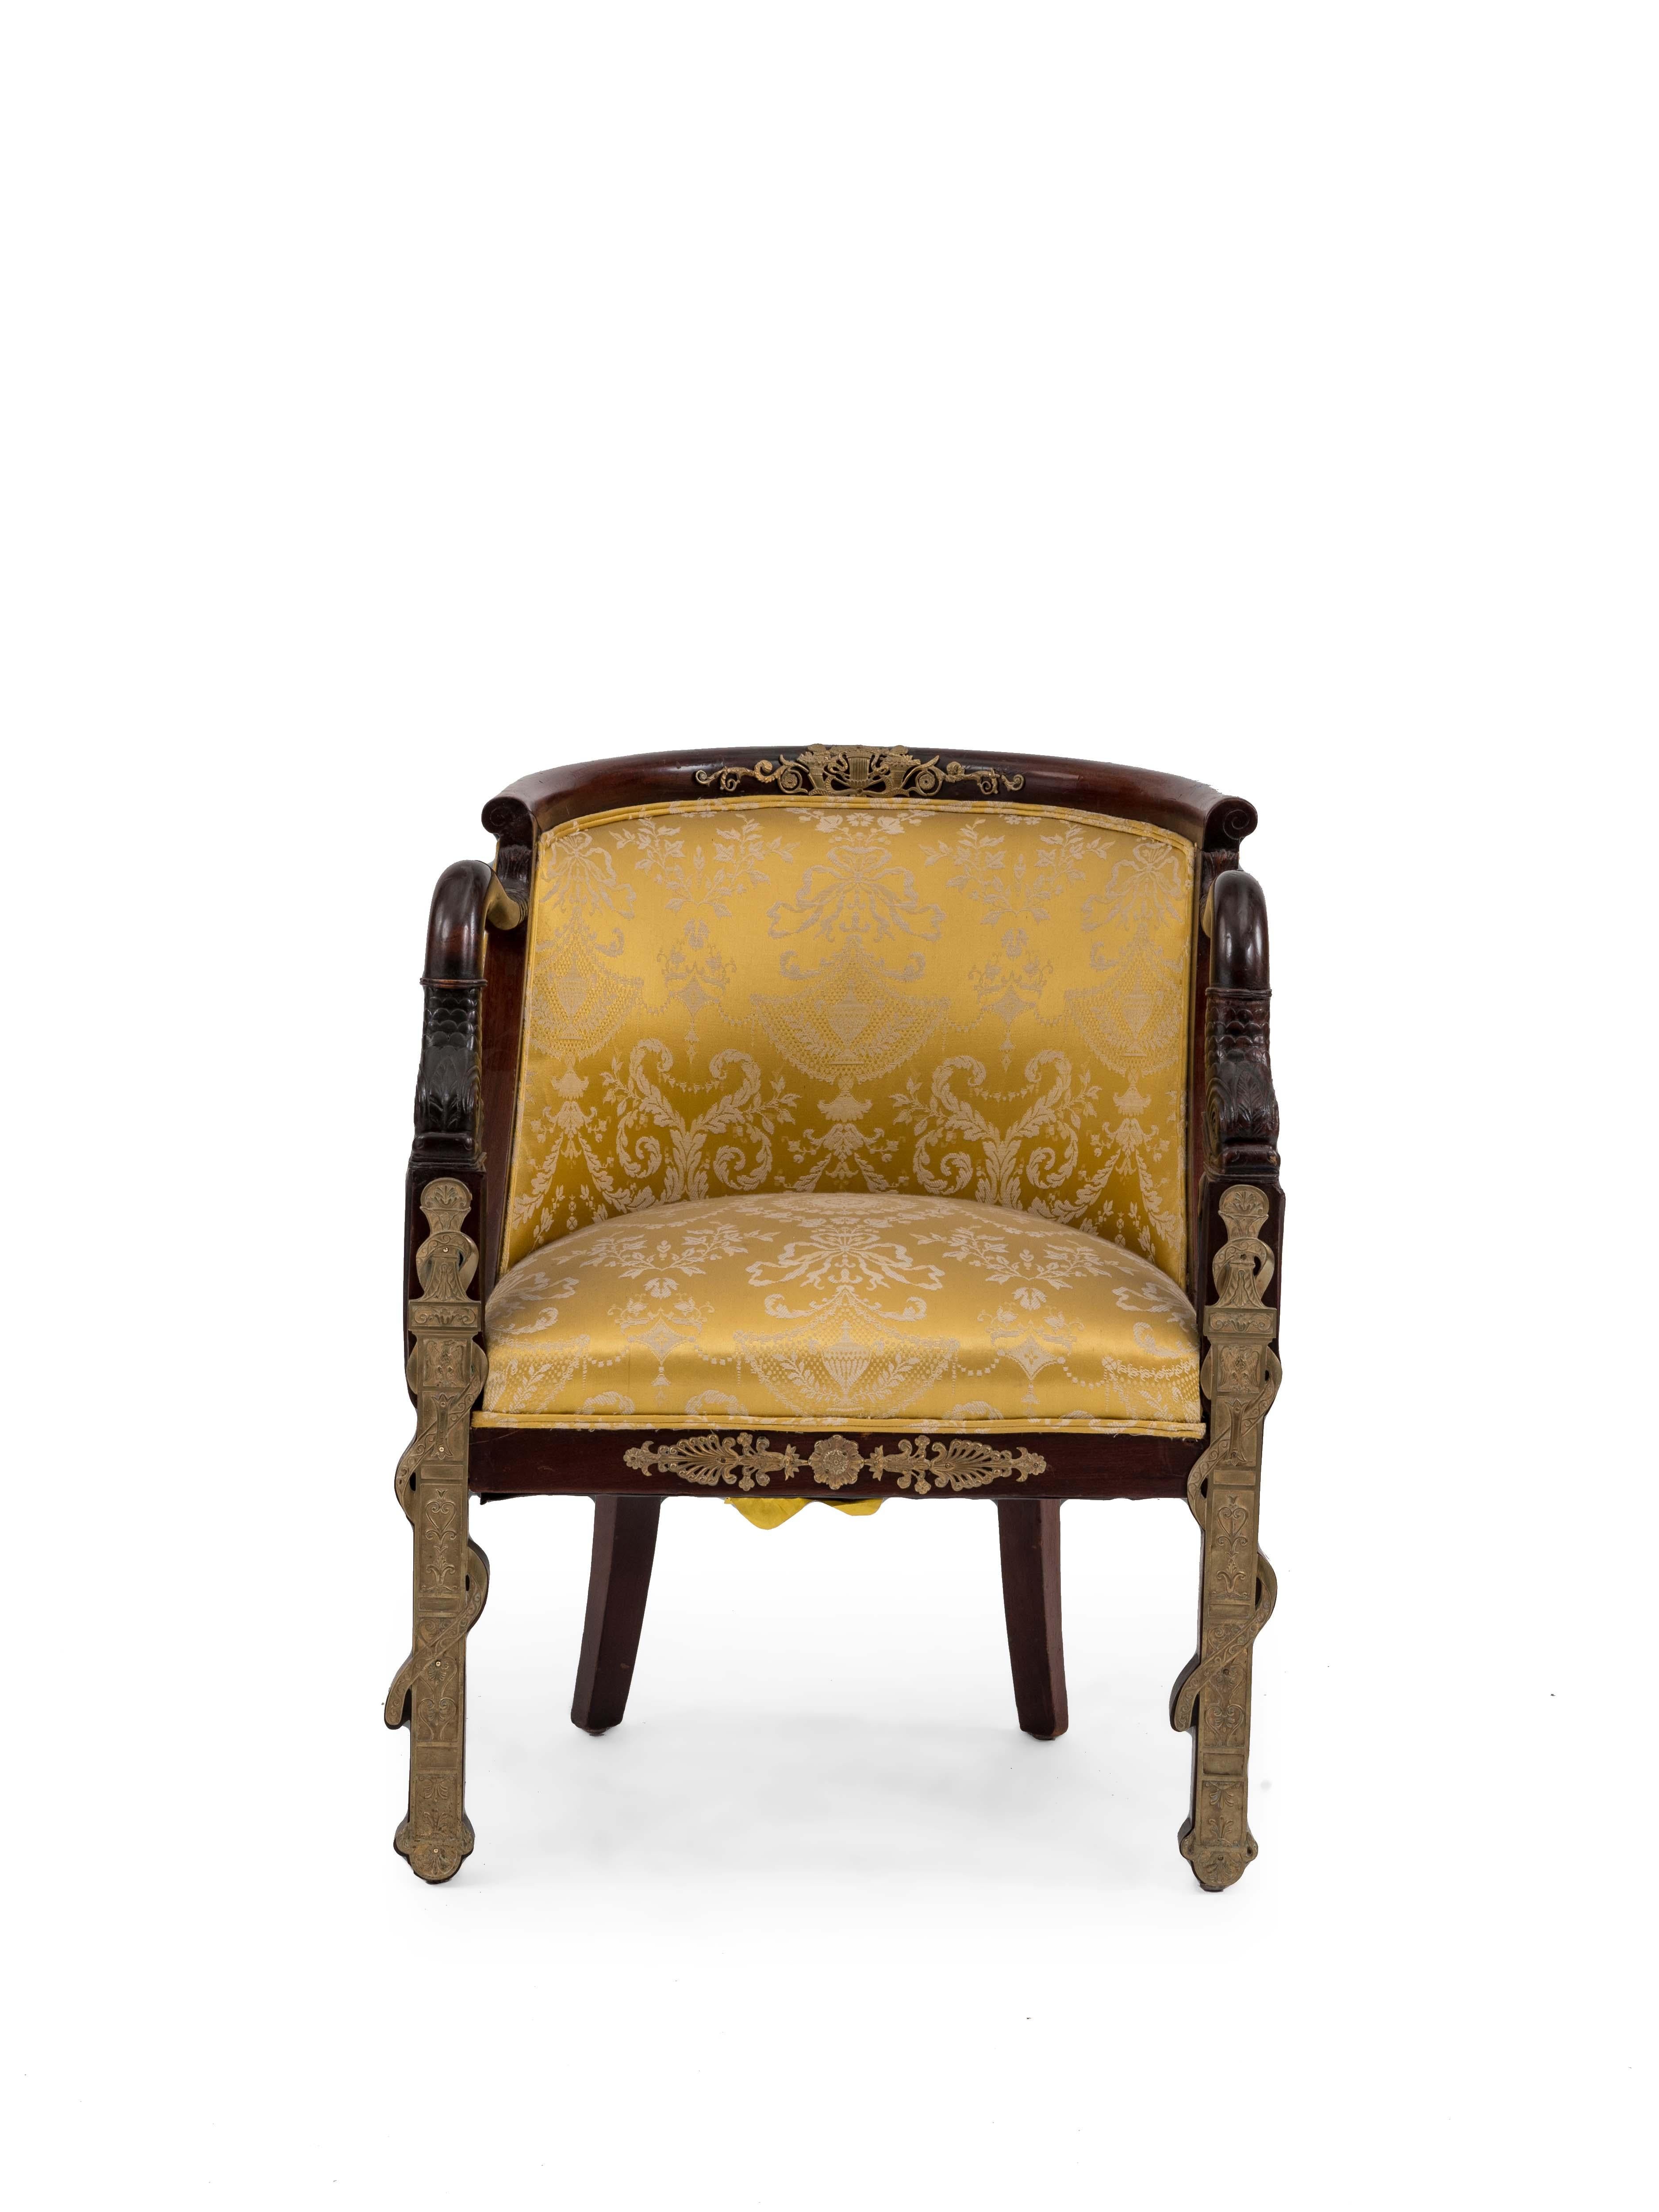 French Empire style (19th Cent) mahogany round back dolphin arm chair with bronze trim and gold upholstery
